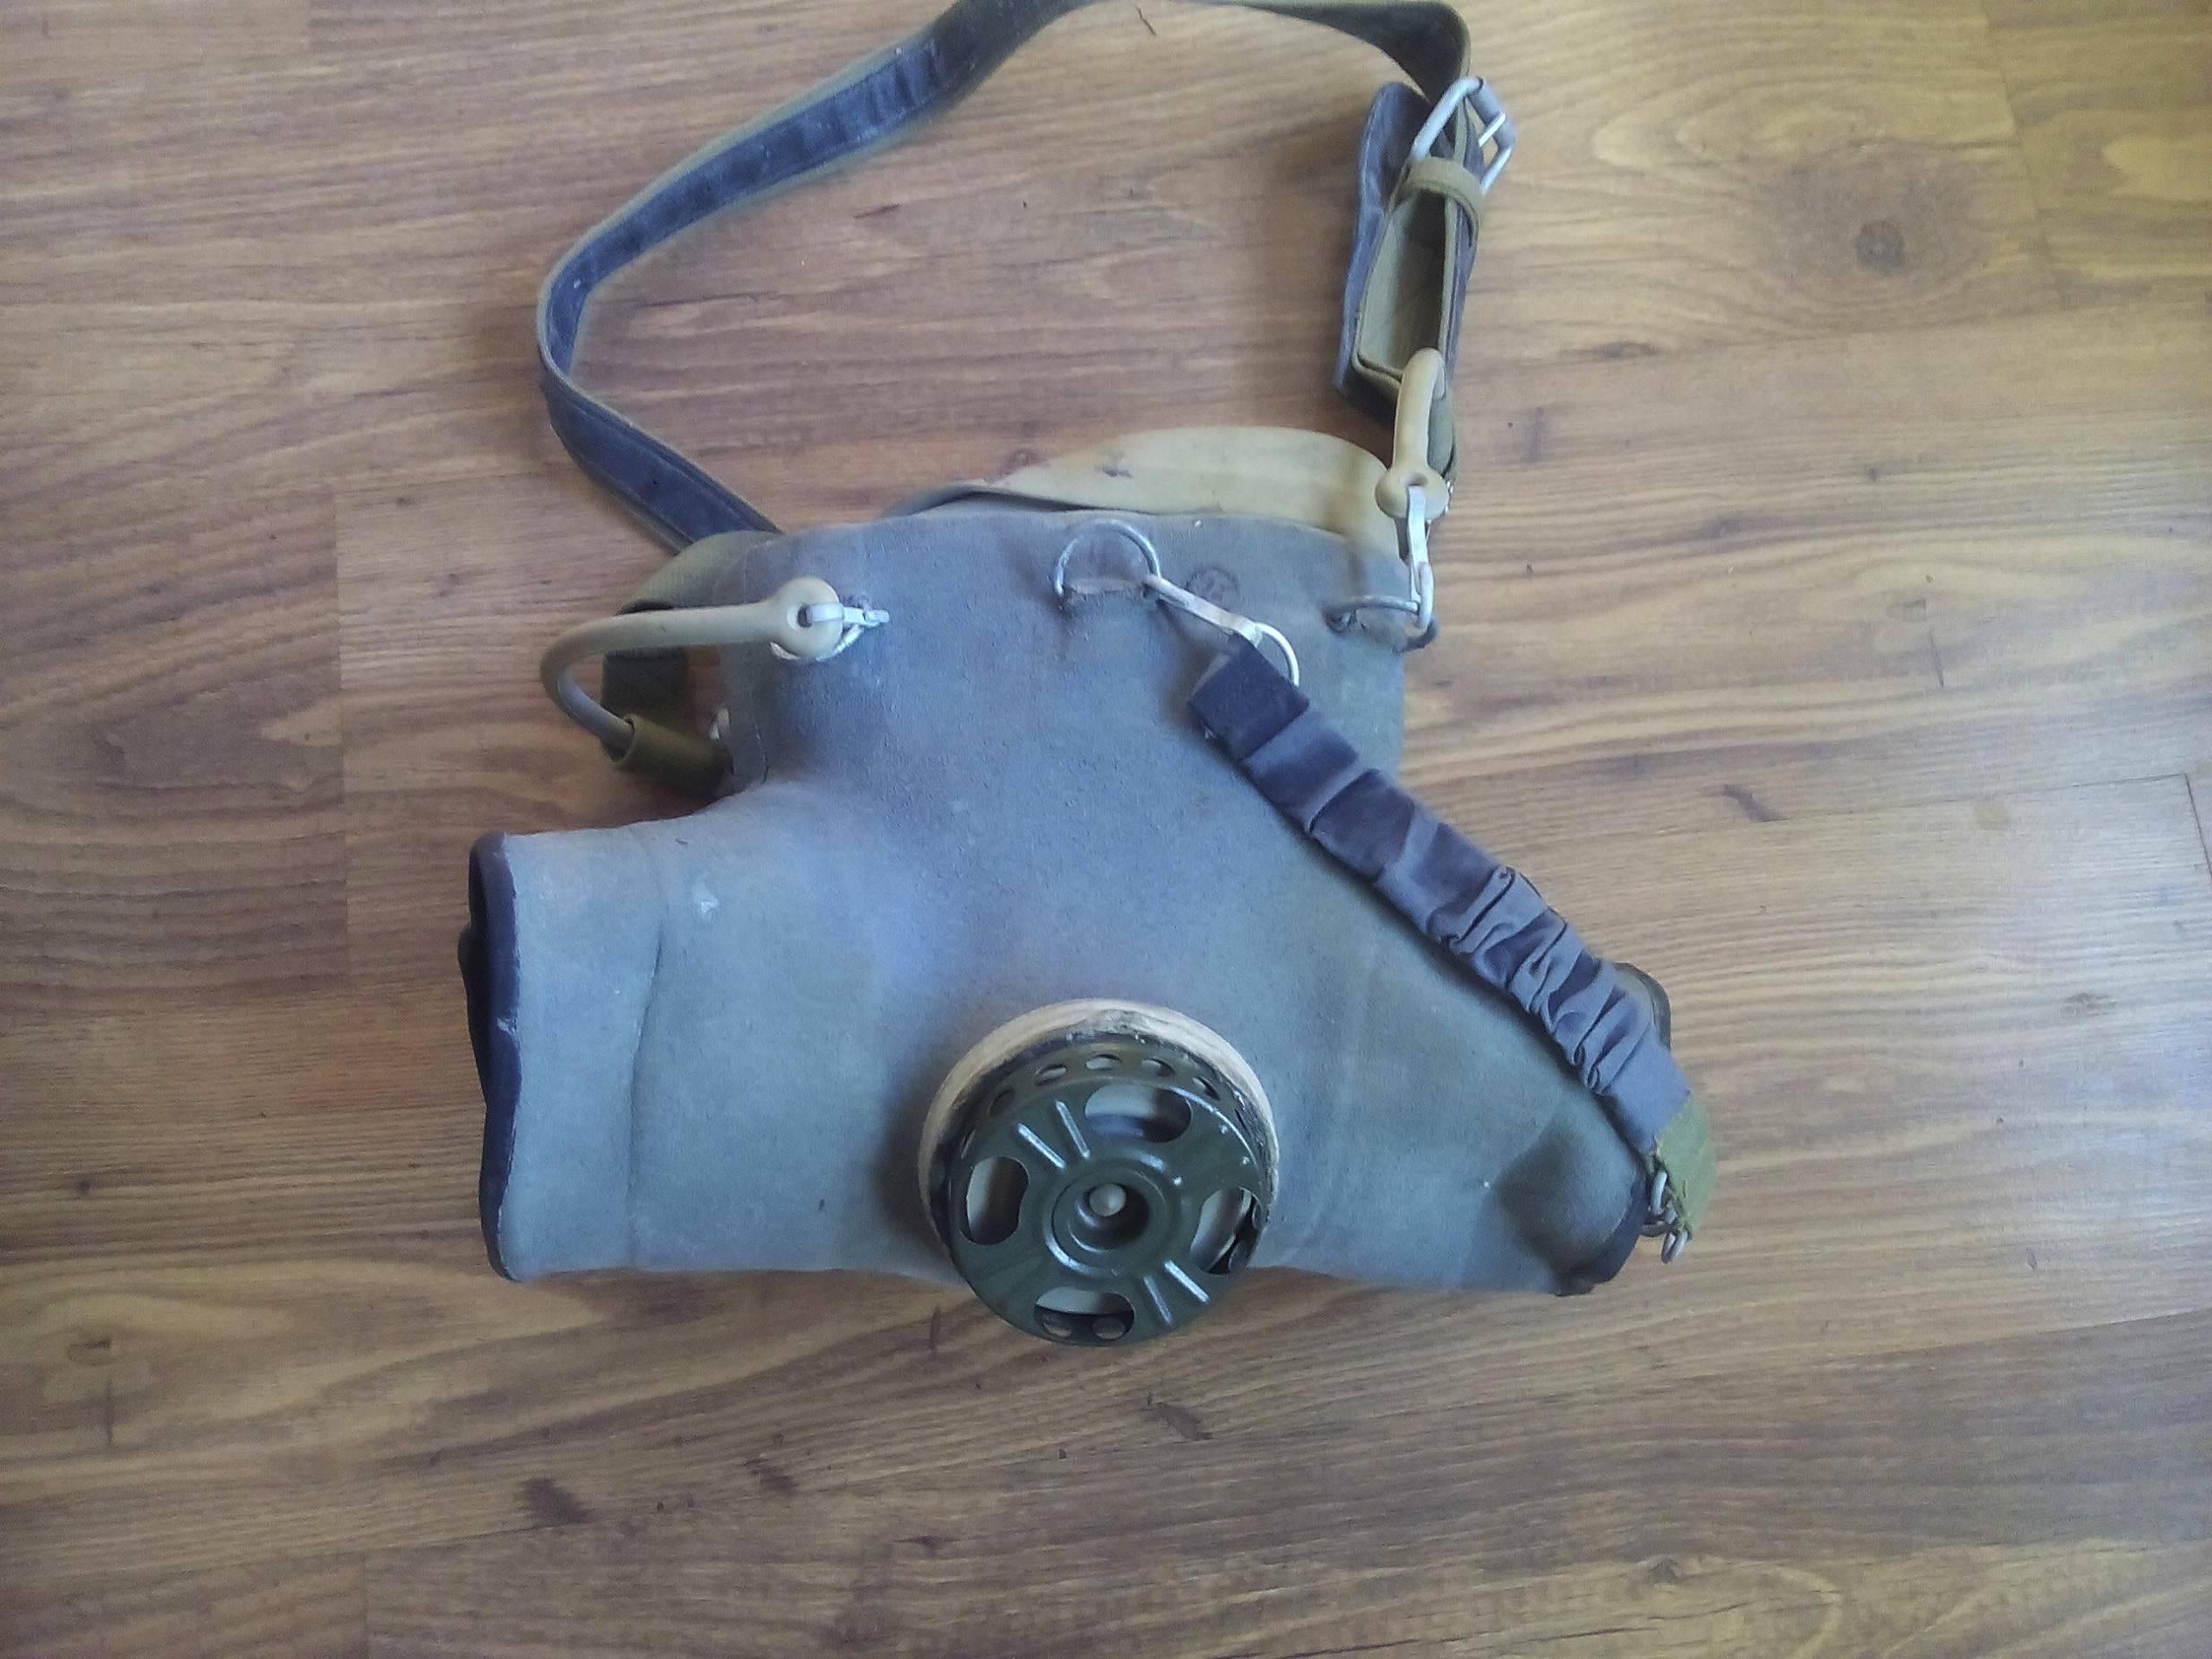 Horse gas mask with safety goggles and a protection cover and protection shoes with the original bag made in the early 1950s in Russia.
Perfect original and unused condition.